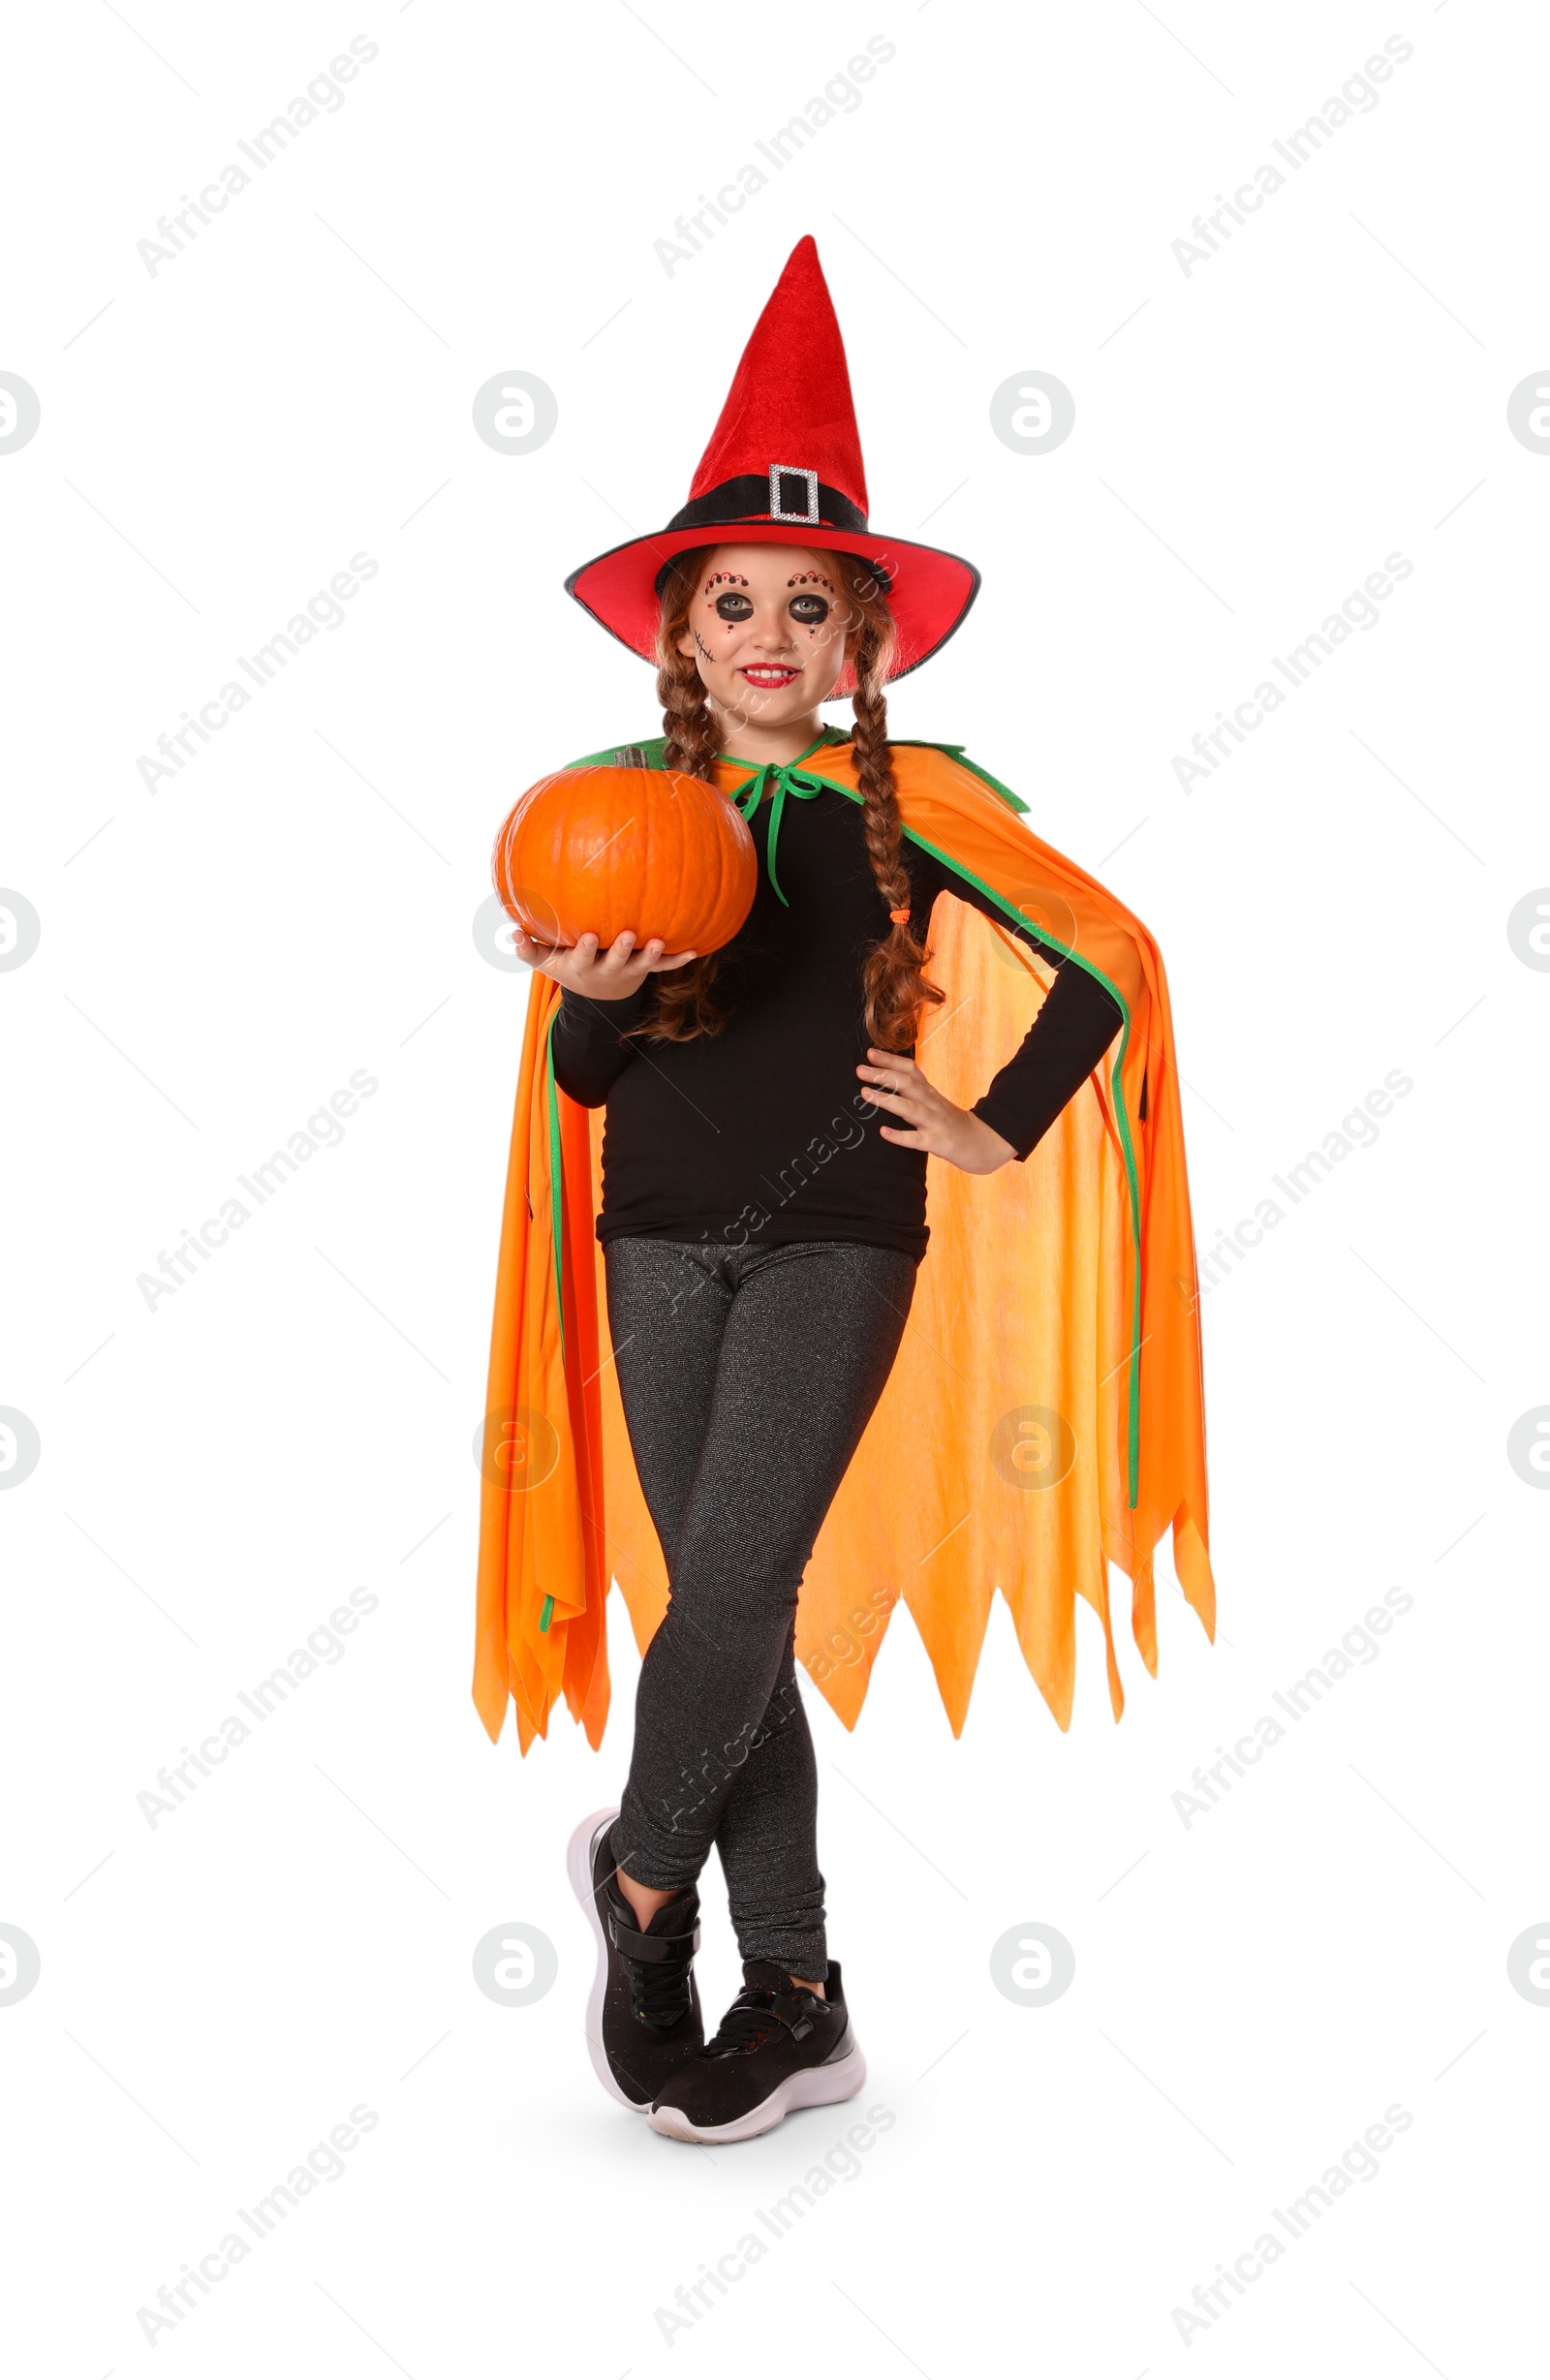 Photo of Cute little girl with pumpkin wearing Halloween costume on white background